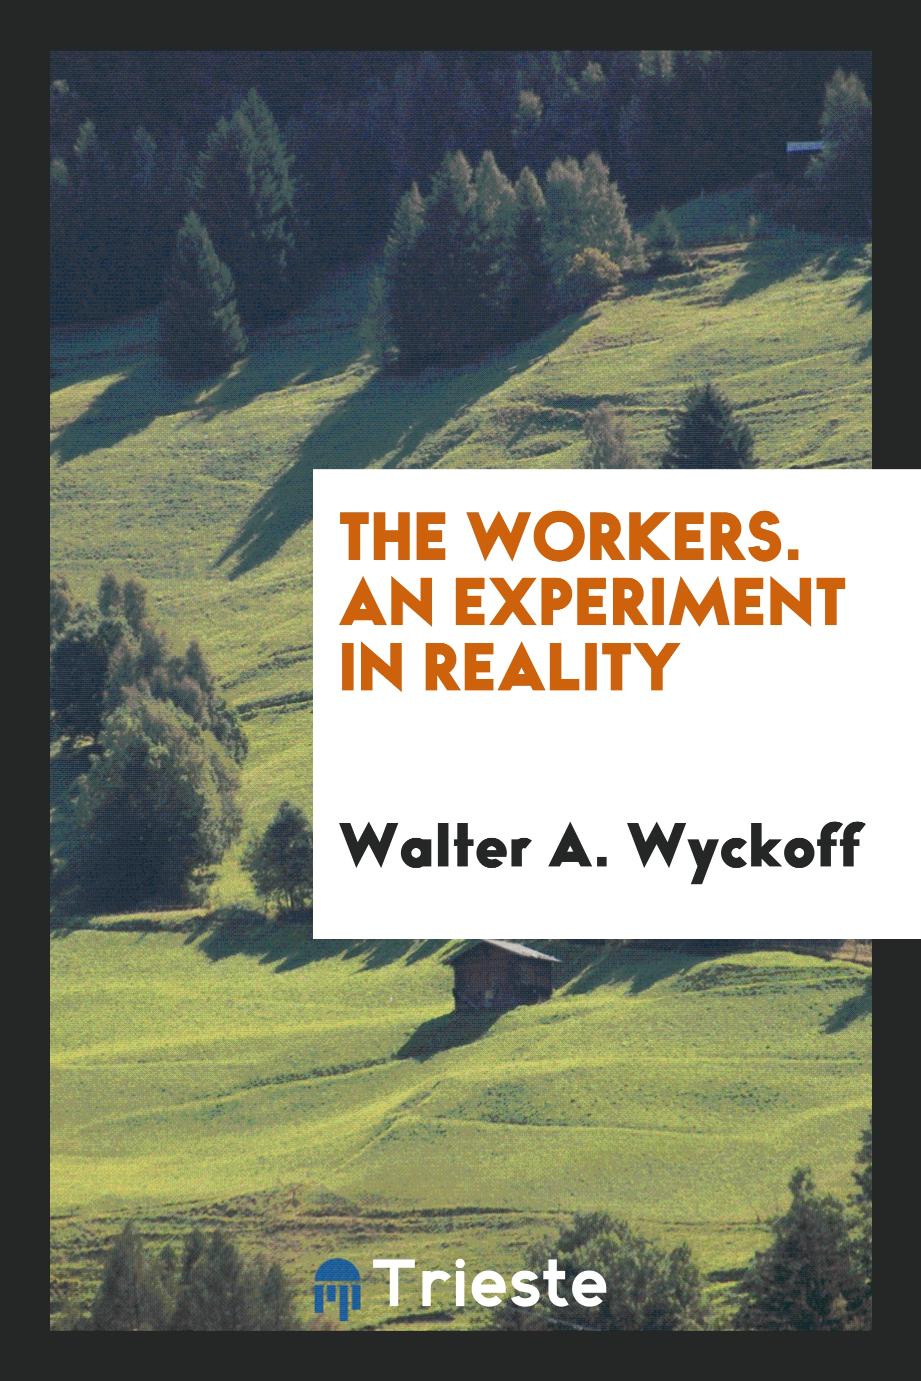 The workers. An experiment in reality